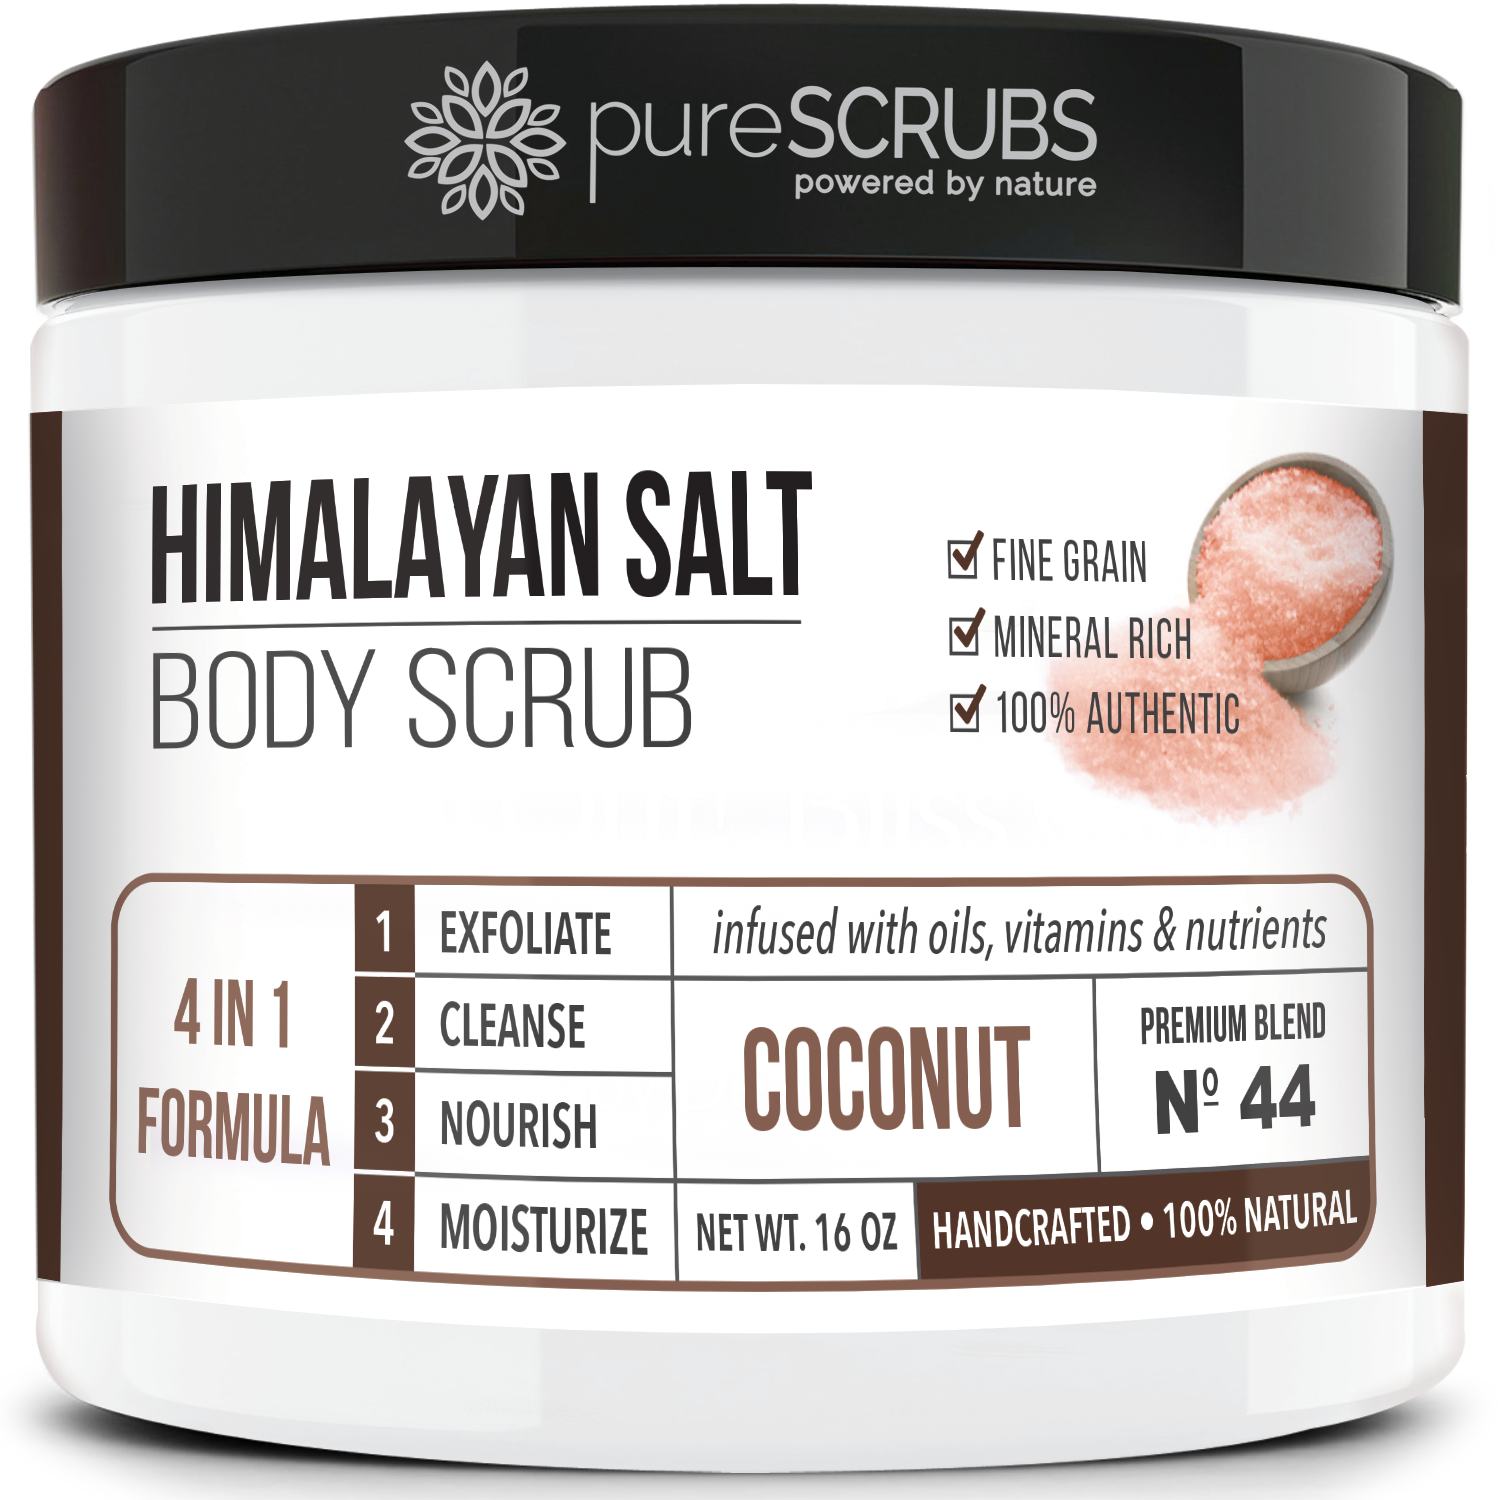 purescrubs 16oz jar coconut pink himalayan salt body scrub Premium Blend #44 to exfoliate your skin comes with free loofah pad free exfoliating organic oatmeal bar soap shea butter and honey and free eco-friendly bamboo spoon to stir and scoop out the scrub 